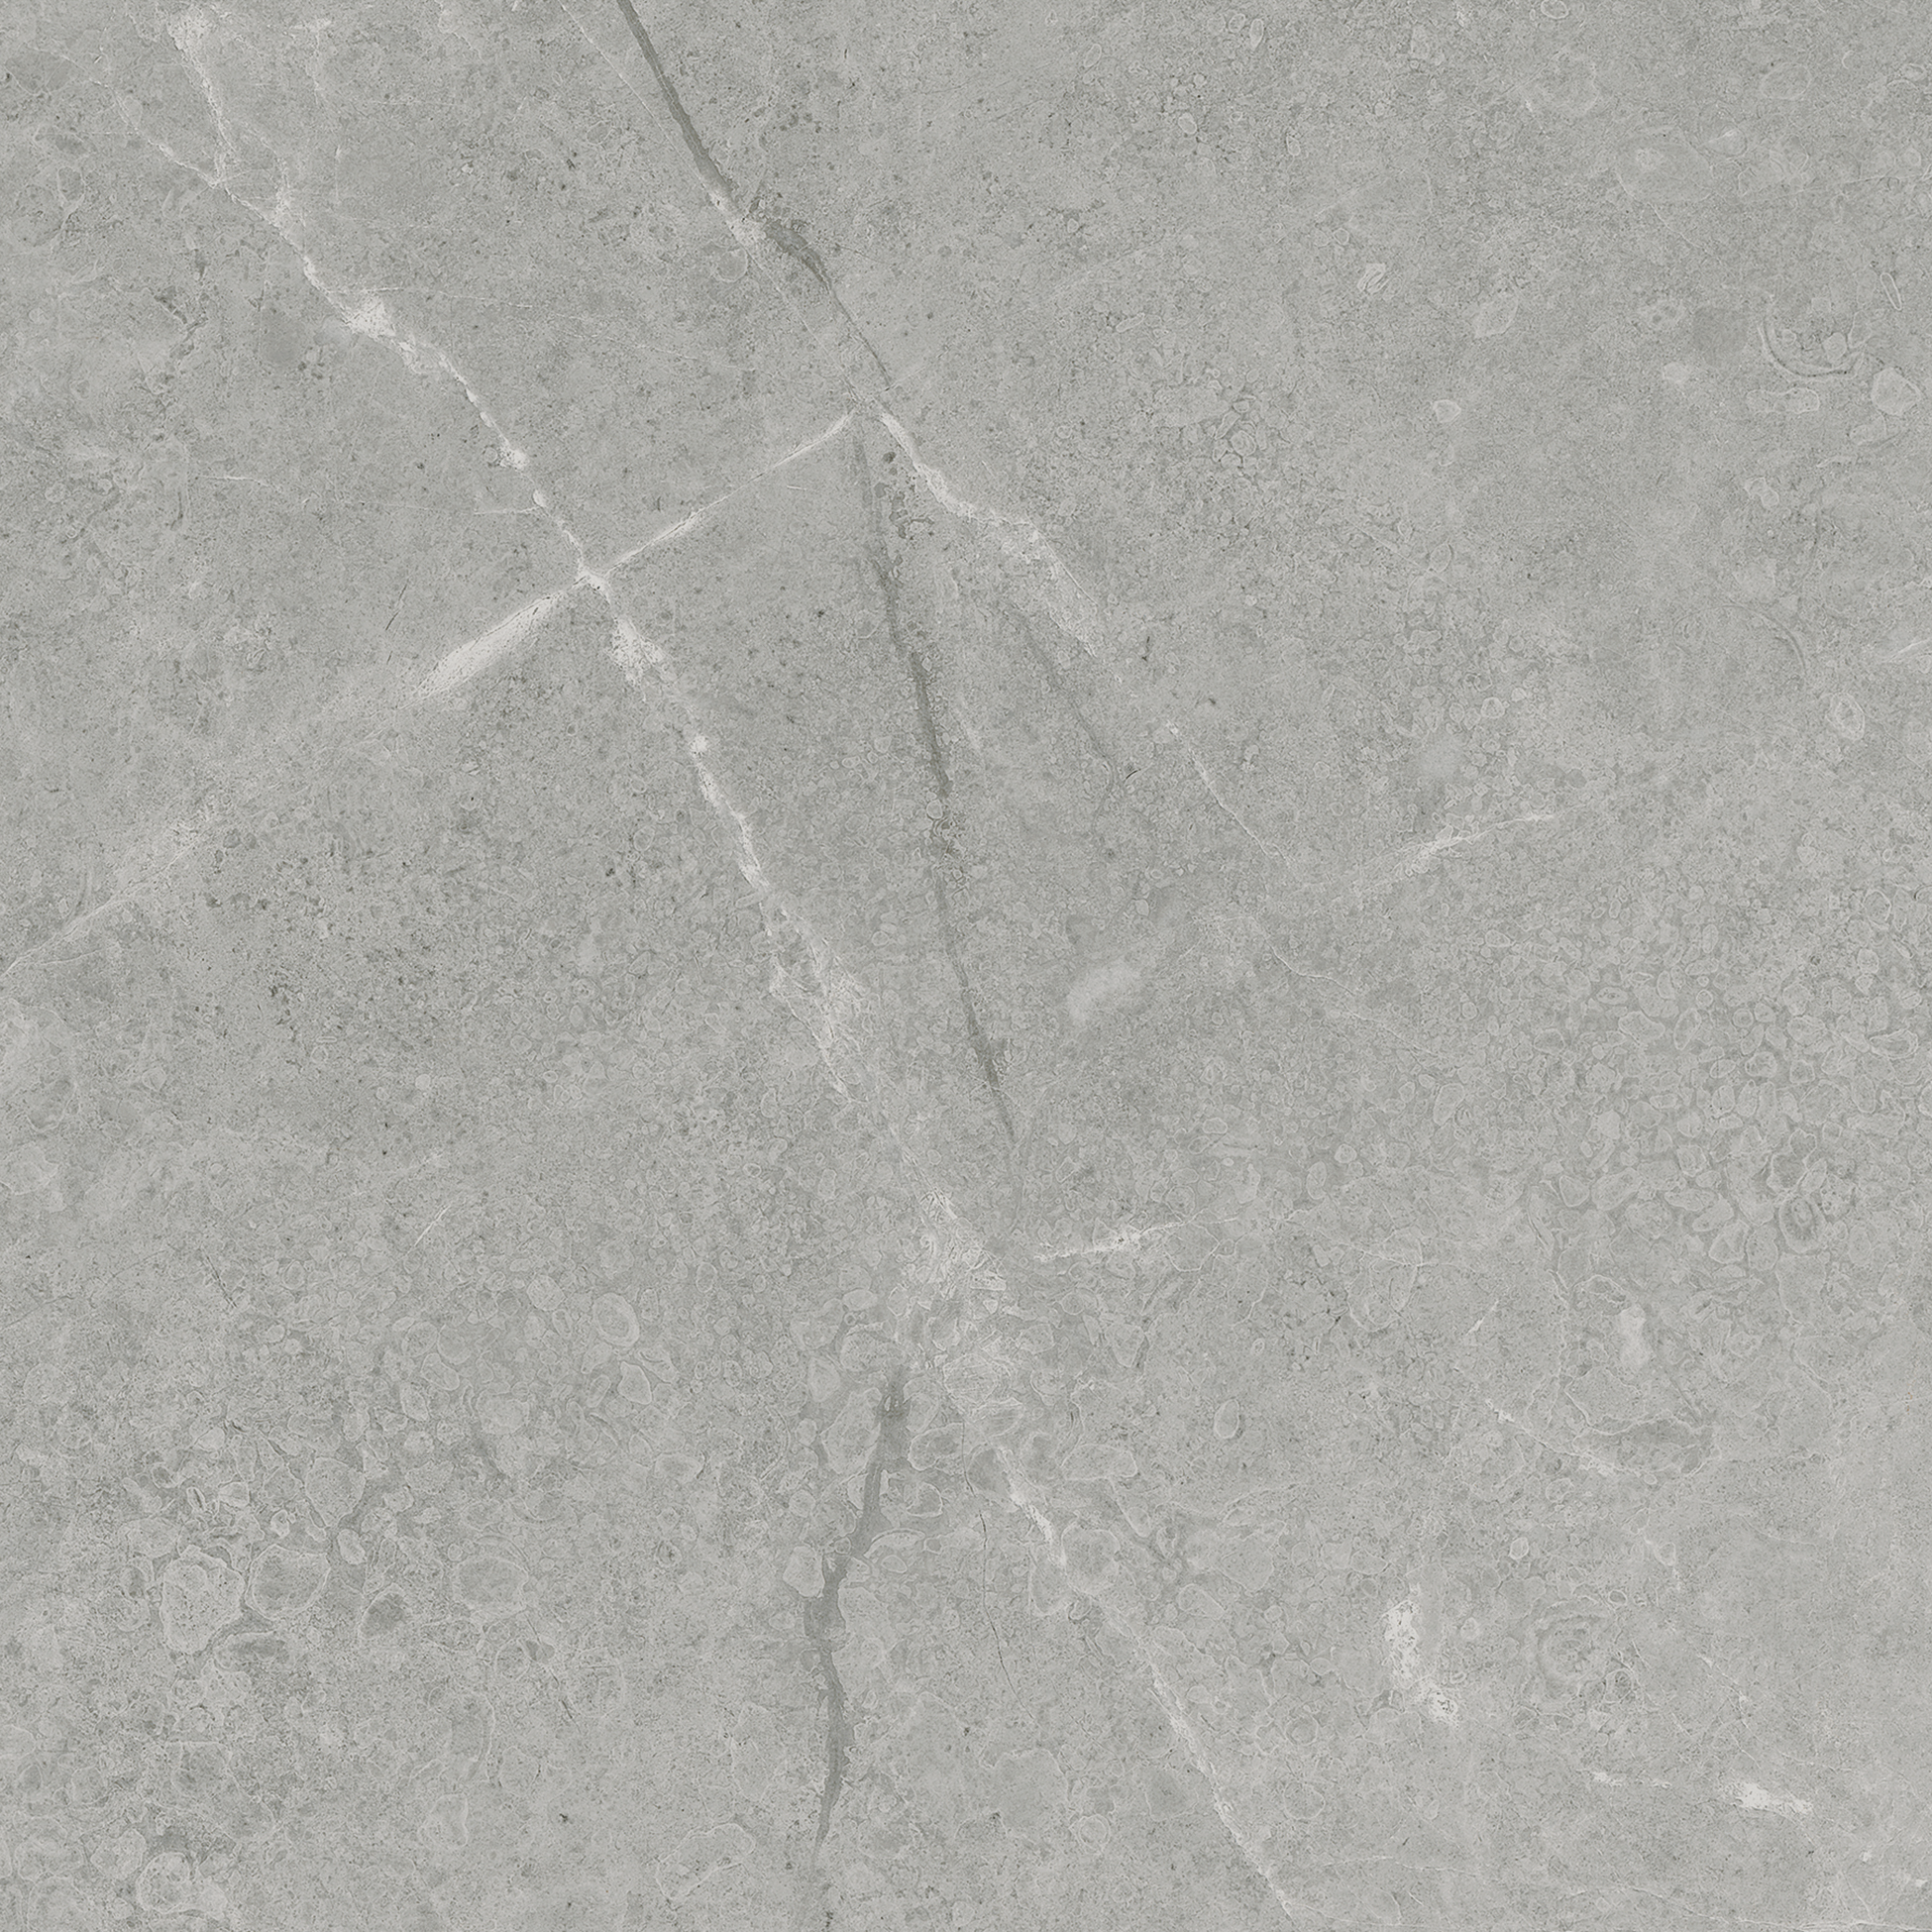 argento pattern glazed porcelain field tile from torino anatolia collection distributed by surface group international matte finish pressed edge 13x13 square shape